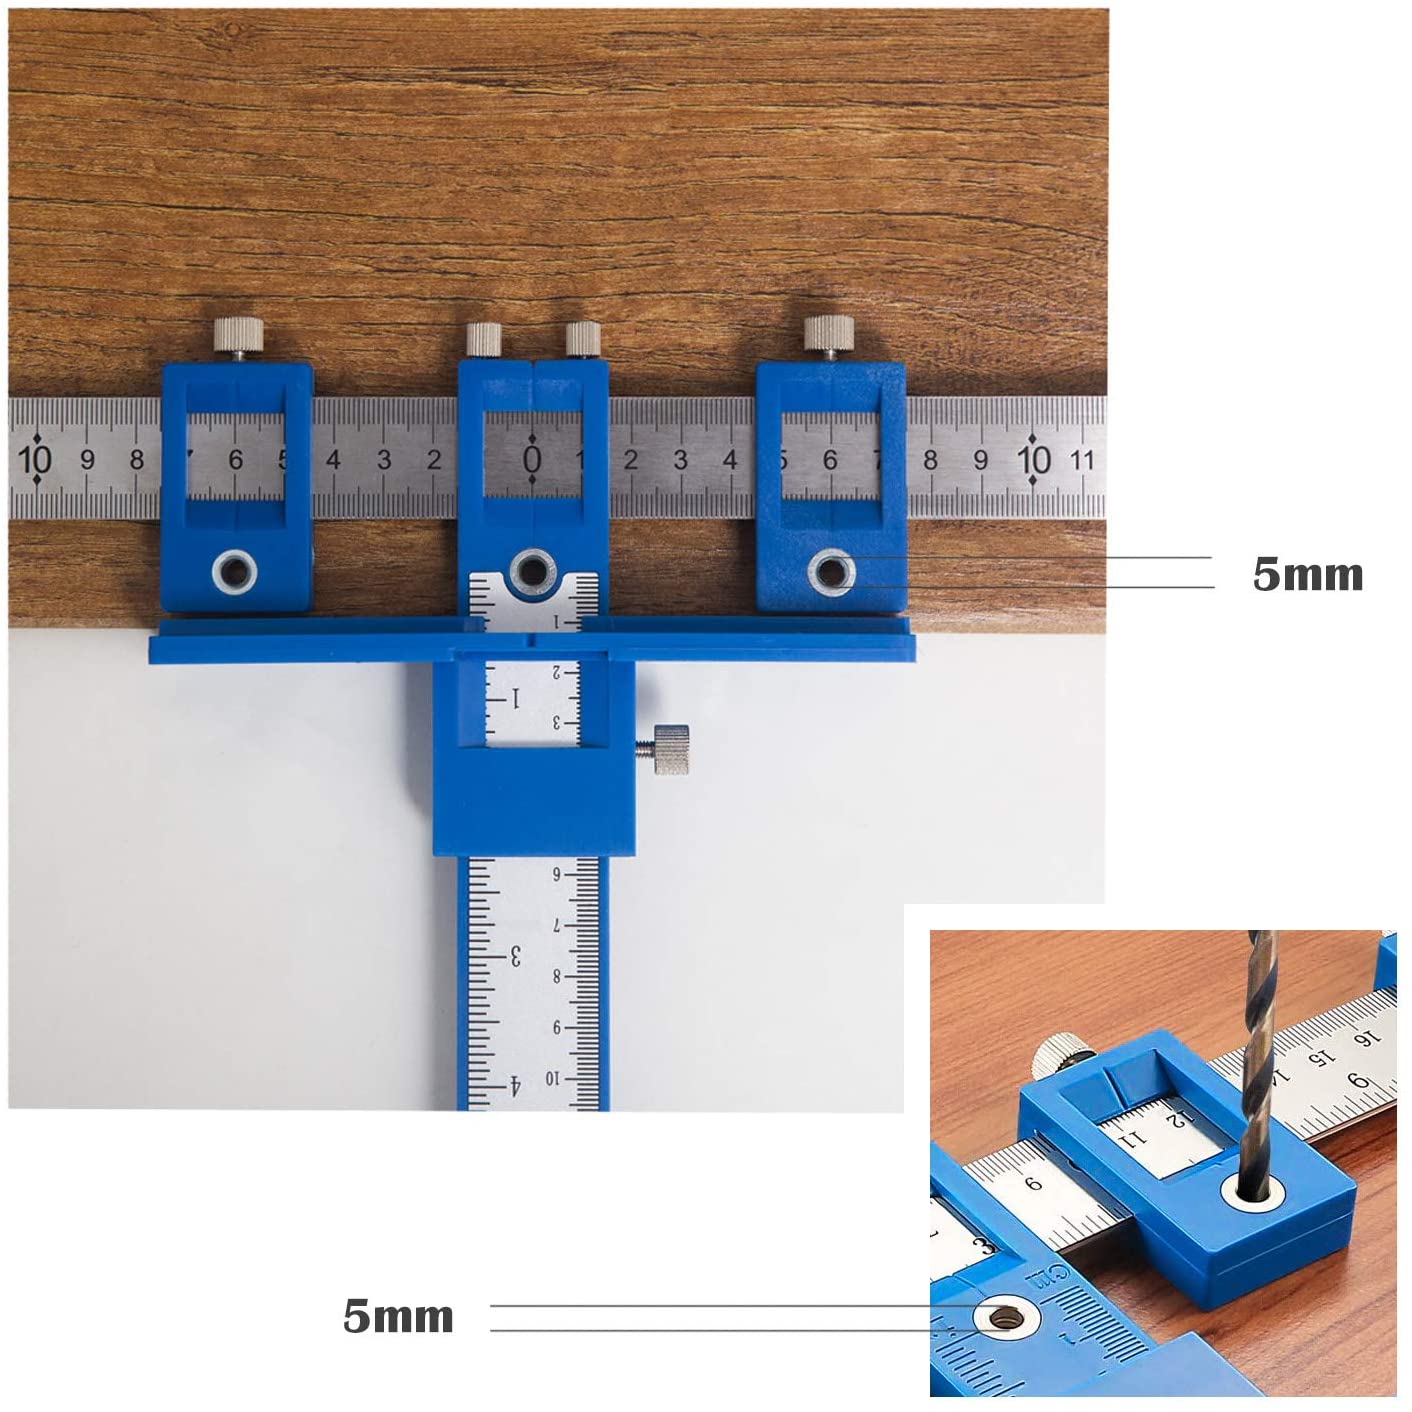 FREE - Cabinet Hardware Template Tool-Adjustable Drill Guide - e4cents